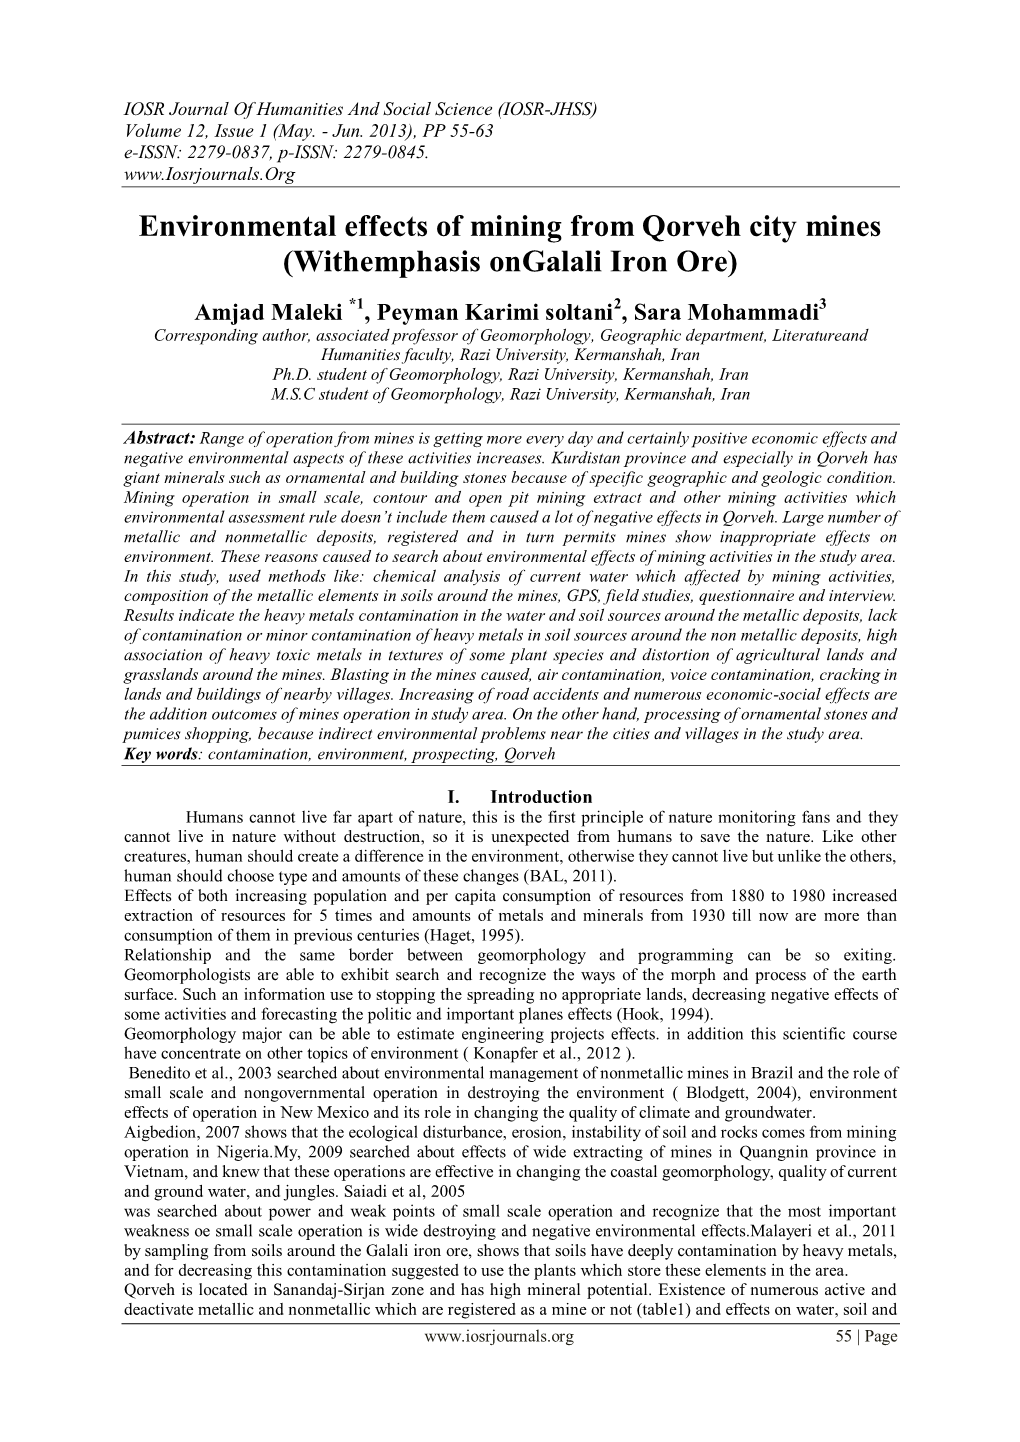 Environmental Effects of Mining from Qorveh City Mines (Withemphasis Ongalali Iron Ore)